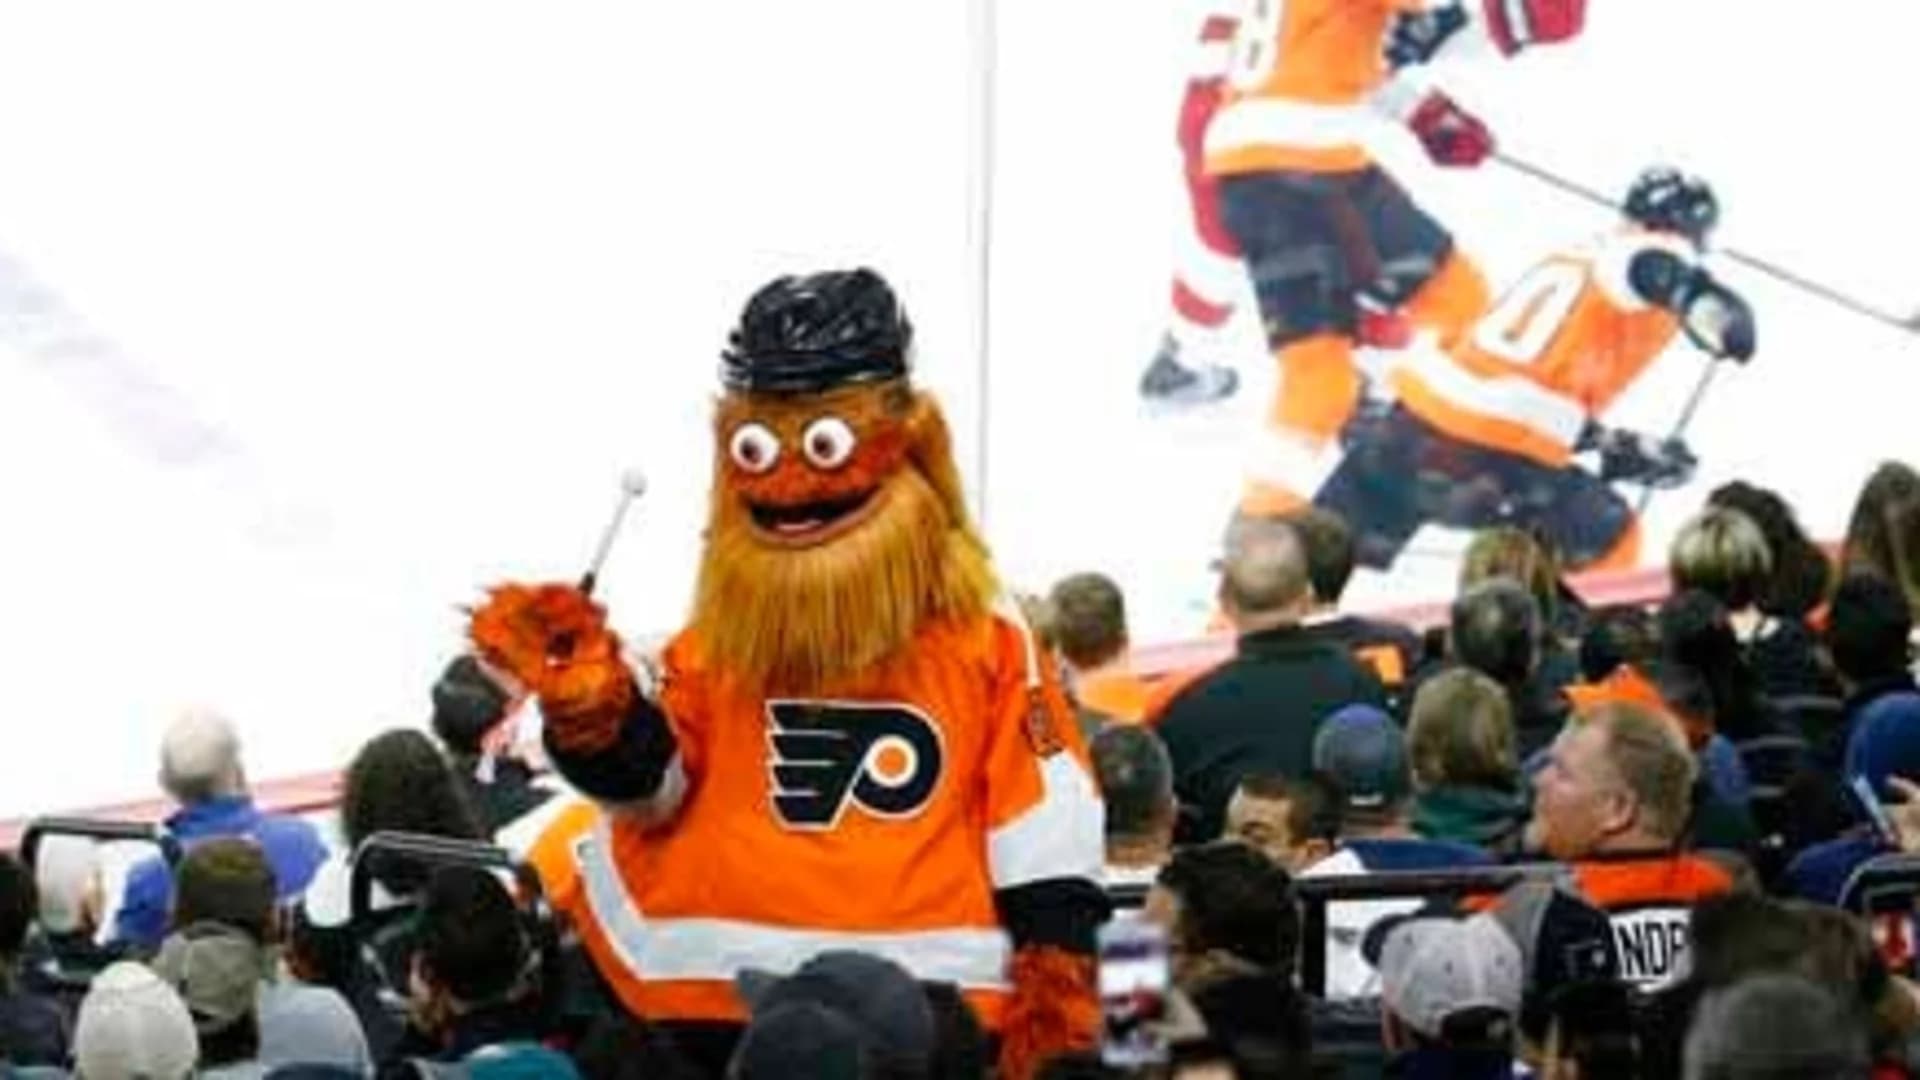 Police clear Flyers mascot Gritty following assault allegation